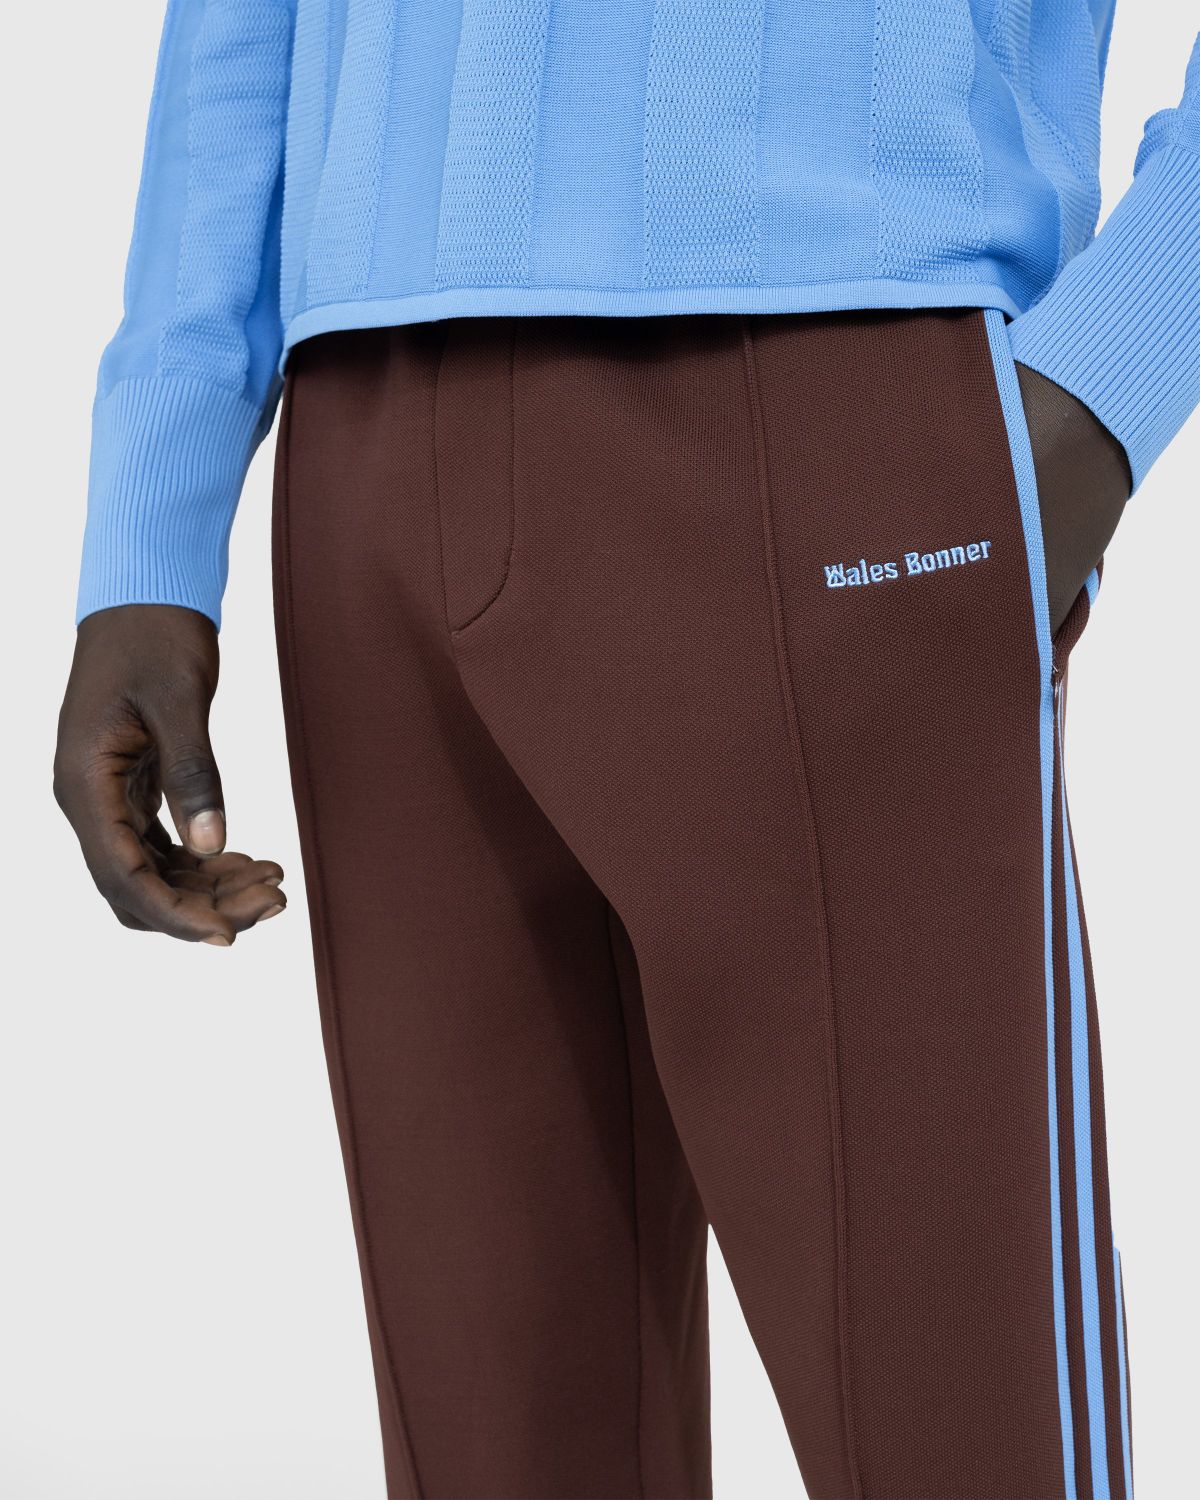 Adidas x Wales Bonner – Knit Track Pant Mystery Brown - Pants - Brown - Image 5